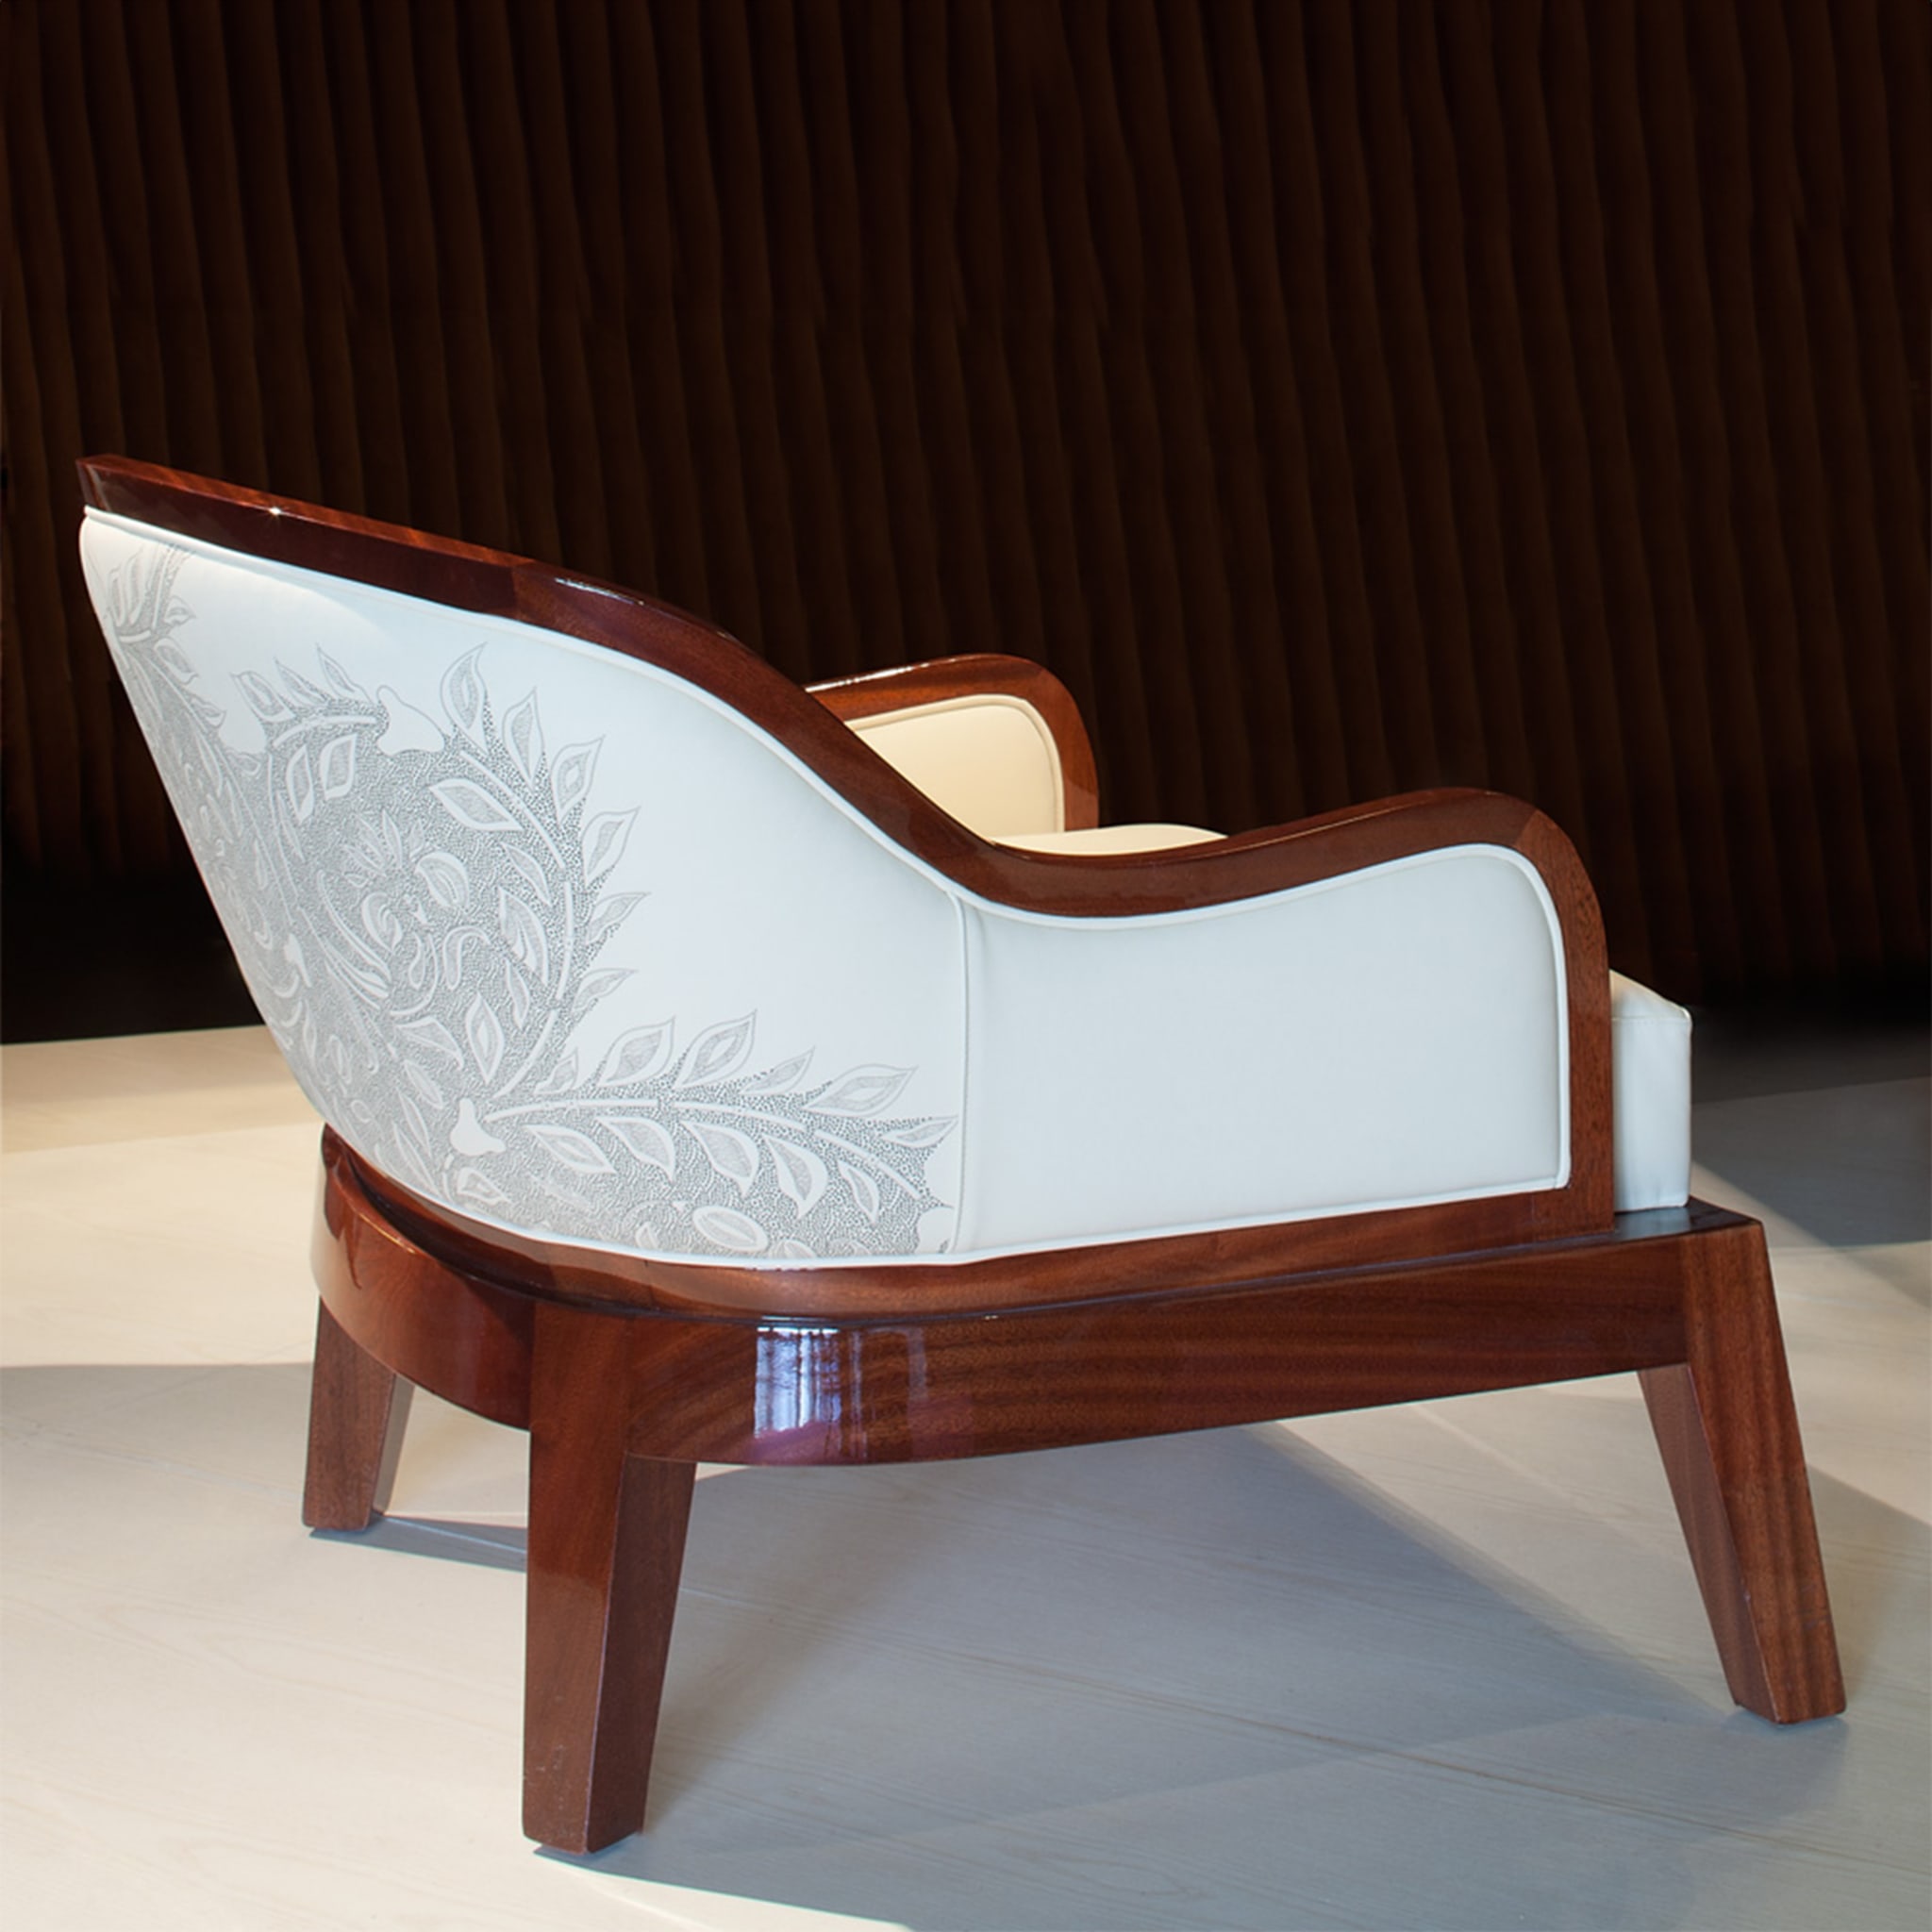 Madama Armchair by Archer Humphryes Architects #2 - Alternative view 2